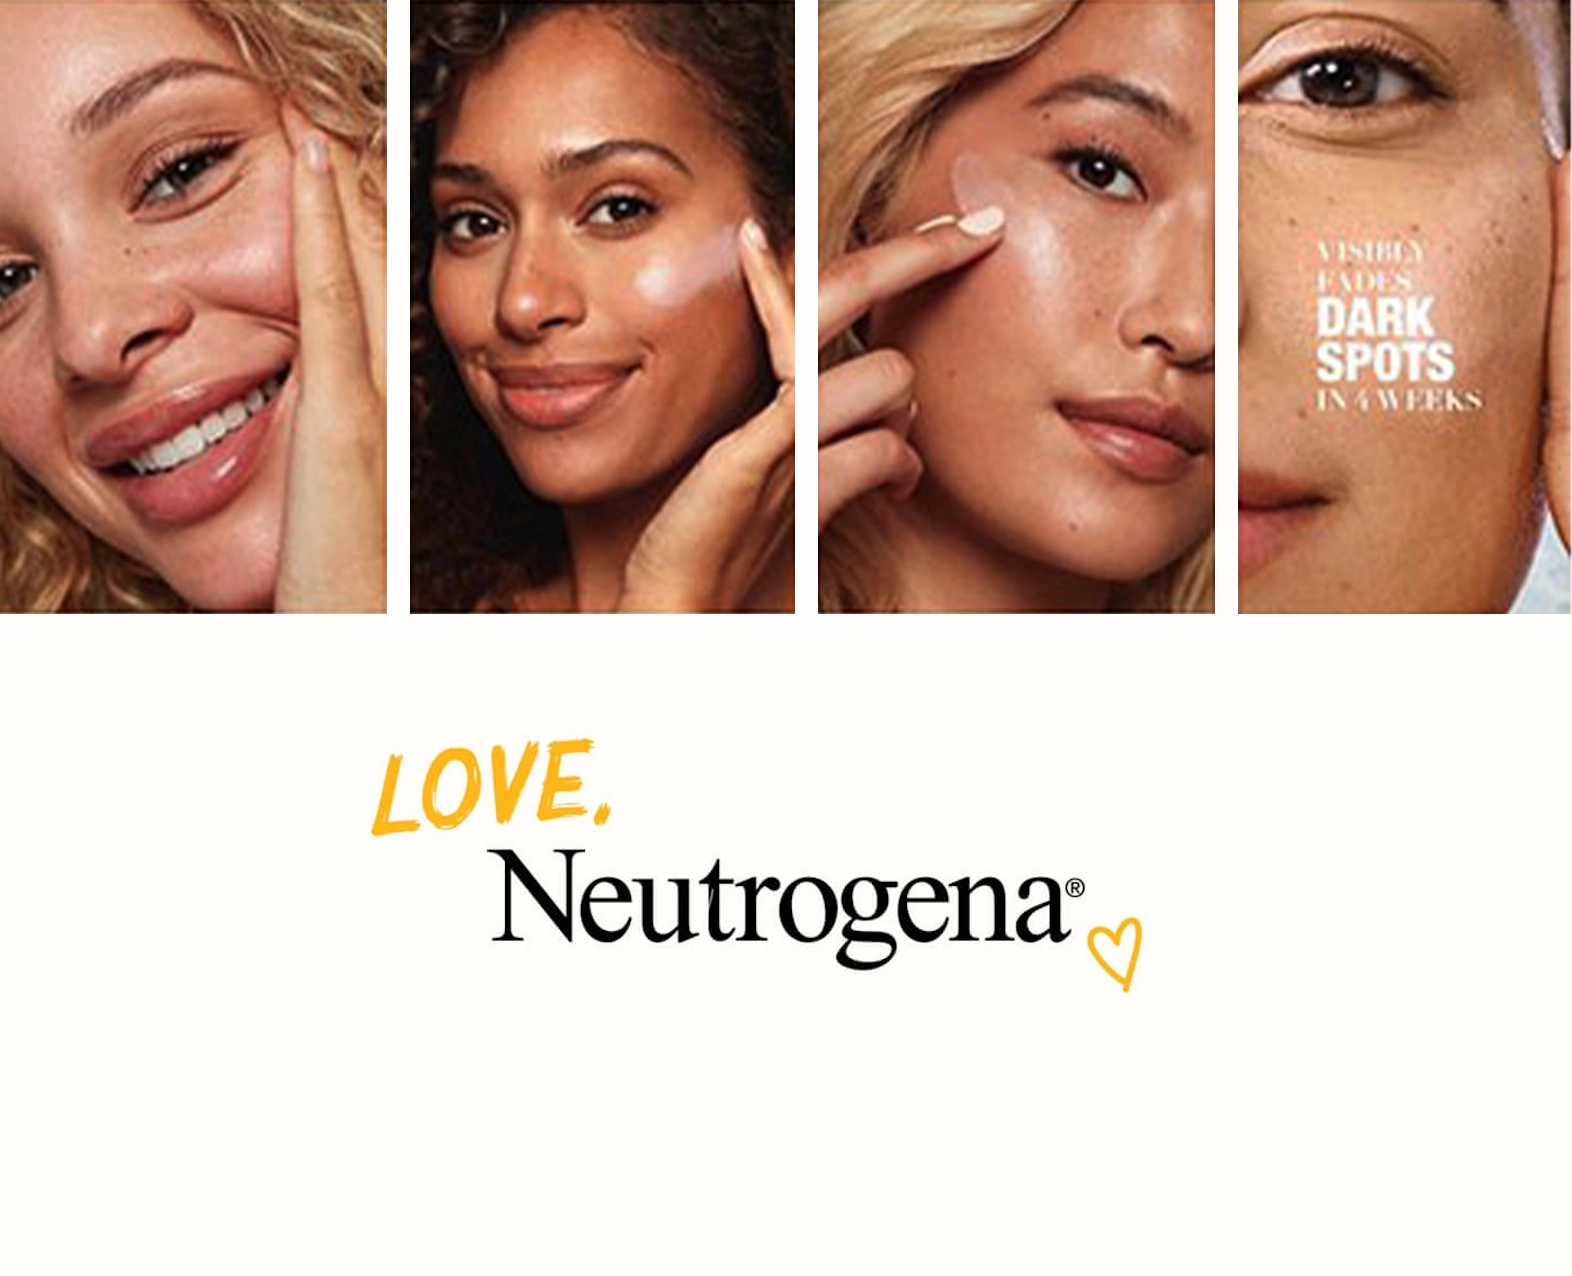 Love, Neutrogena campaign featuring diverse models showcasing skincare products. (photo)